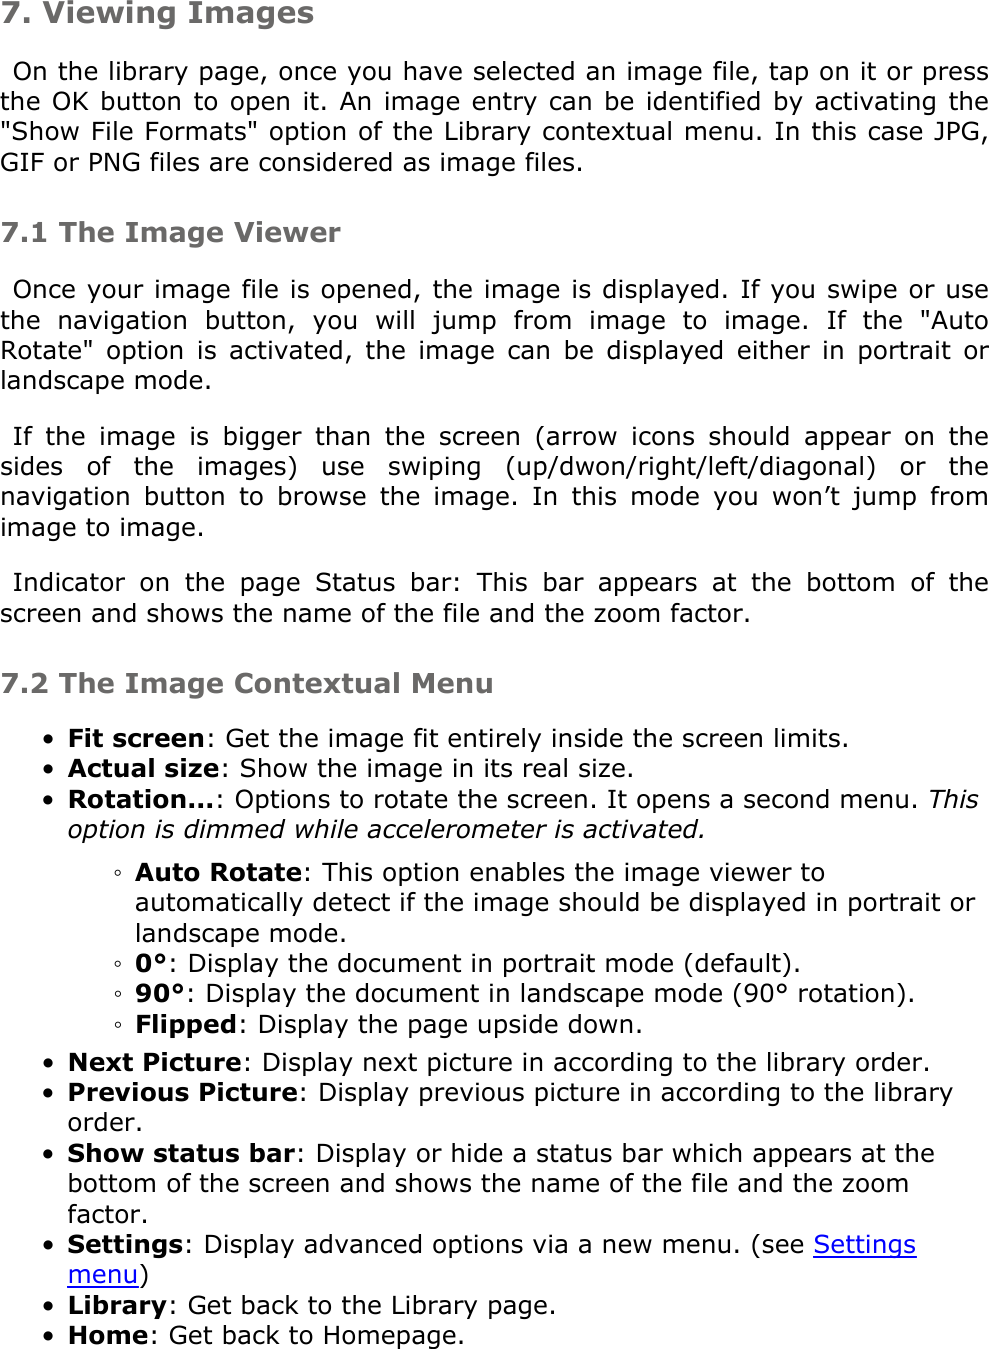 7. Viewing ImagesOn the library page, once you have selected an image file, tap on it or press the OK button to open it. An image entry can be identified by activating the &quot;Show File Formats&quot; option of the Library contextual menu. In this case JPG, GIF or PNG files are considered as image files.7.1 The Image ViewerOnce your image file is opened, the image is displayed. If you swipe or use the  navigation  button,  you  will  jump  from  image  to  image.  If  the  &quot;Auto Rotate&quot;  option  is  activated,  the  image  can  be  displayed  either  in  portrait  or landscape mode.If  the  image  is  bigger  than  the  screen  (arrow  icons  should  appear  on  the sides  of  the  images)  use  swiping  (up/dwon/right/left/diagonal)  or  the navigation  button  to  browse  the  image.  In  this  mode  you  won’t  jump  from image to image.Indicator  on  the  page  Status  bar:  This  bar  appears  at  the  bottom  of  the screen and shows the name of the file and the zoom factor. 7.2 The Image Contextual MenuFit screen: Get the image fit entirely inside the screen limits.•Actual size: Show the image in its real size.•Rotation...: Options to rotate the screen. It opens a second menu. This option is dimmed while accelerometer is activated. •Auto Rotate: This option enables the image viewer to automatically detect if the image should be displayed in portrait or landscape mode.◦0°: Display the document in portrait mode (default).◦90°: Display the document in landscape mode (90° rotation).◦Flipped: Display the page upside down.◦Next Picture: Display next picture in according to the library order.•Previous Picture: Display previous picture in according to the library order.•Show status bar: Display or hide a status bar which appears at the bottom of the screen and shows the name of the file and the zoom factor.•Settings: Display advanced options via a new menu. (see Settings menu)•Library: Get back to the Library page. •Home: Get back to Homepage.•